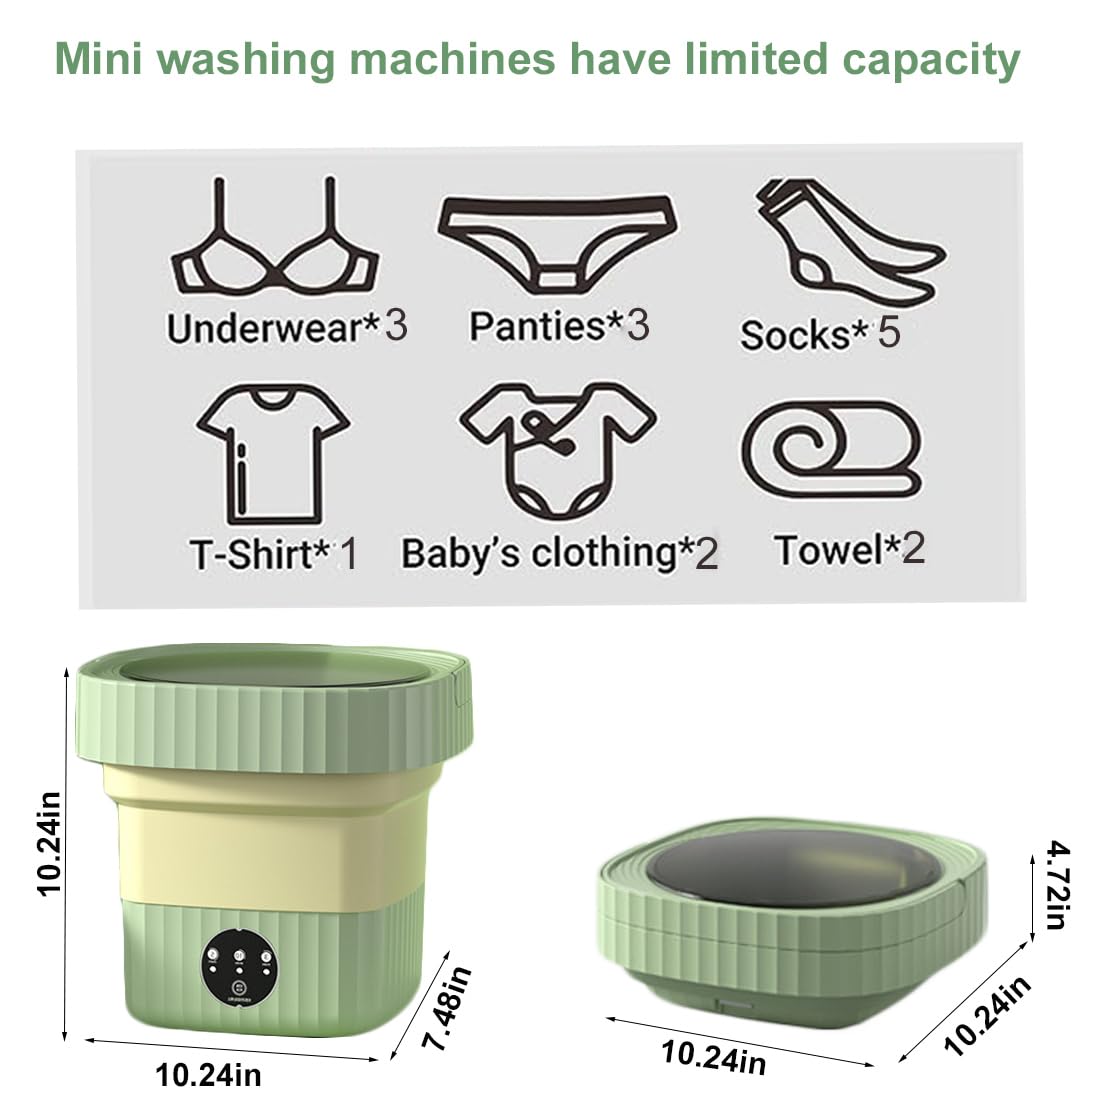 Portable Washing Machine, Foldable Mini Washing Machine, Small Washing Machine for Underwear, Baby Clothes, or Small Items, Suitable for Apartments, Dormitories, Camping, Travel (6 Liters),Green